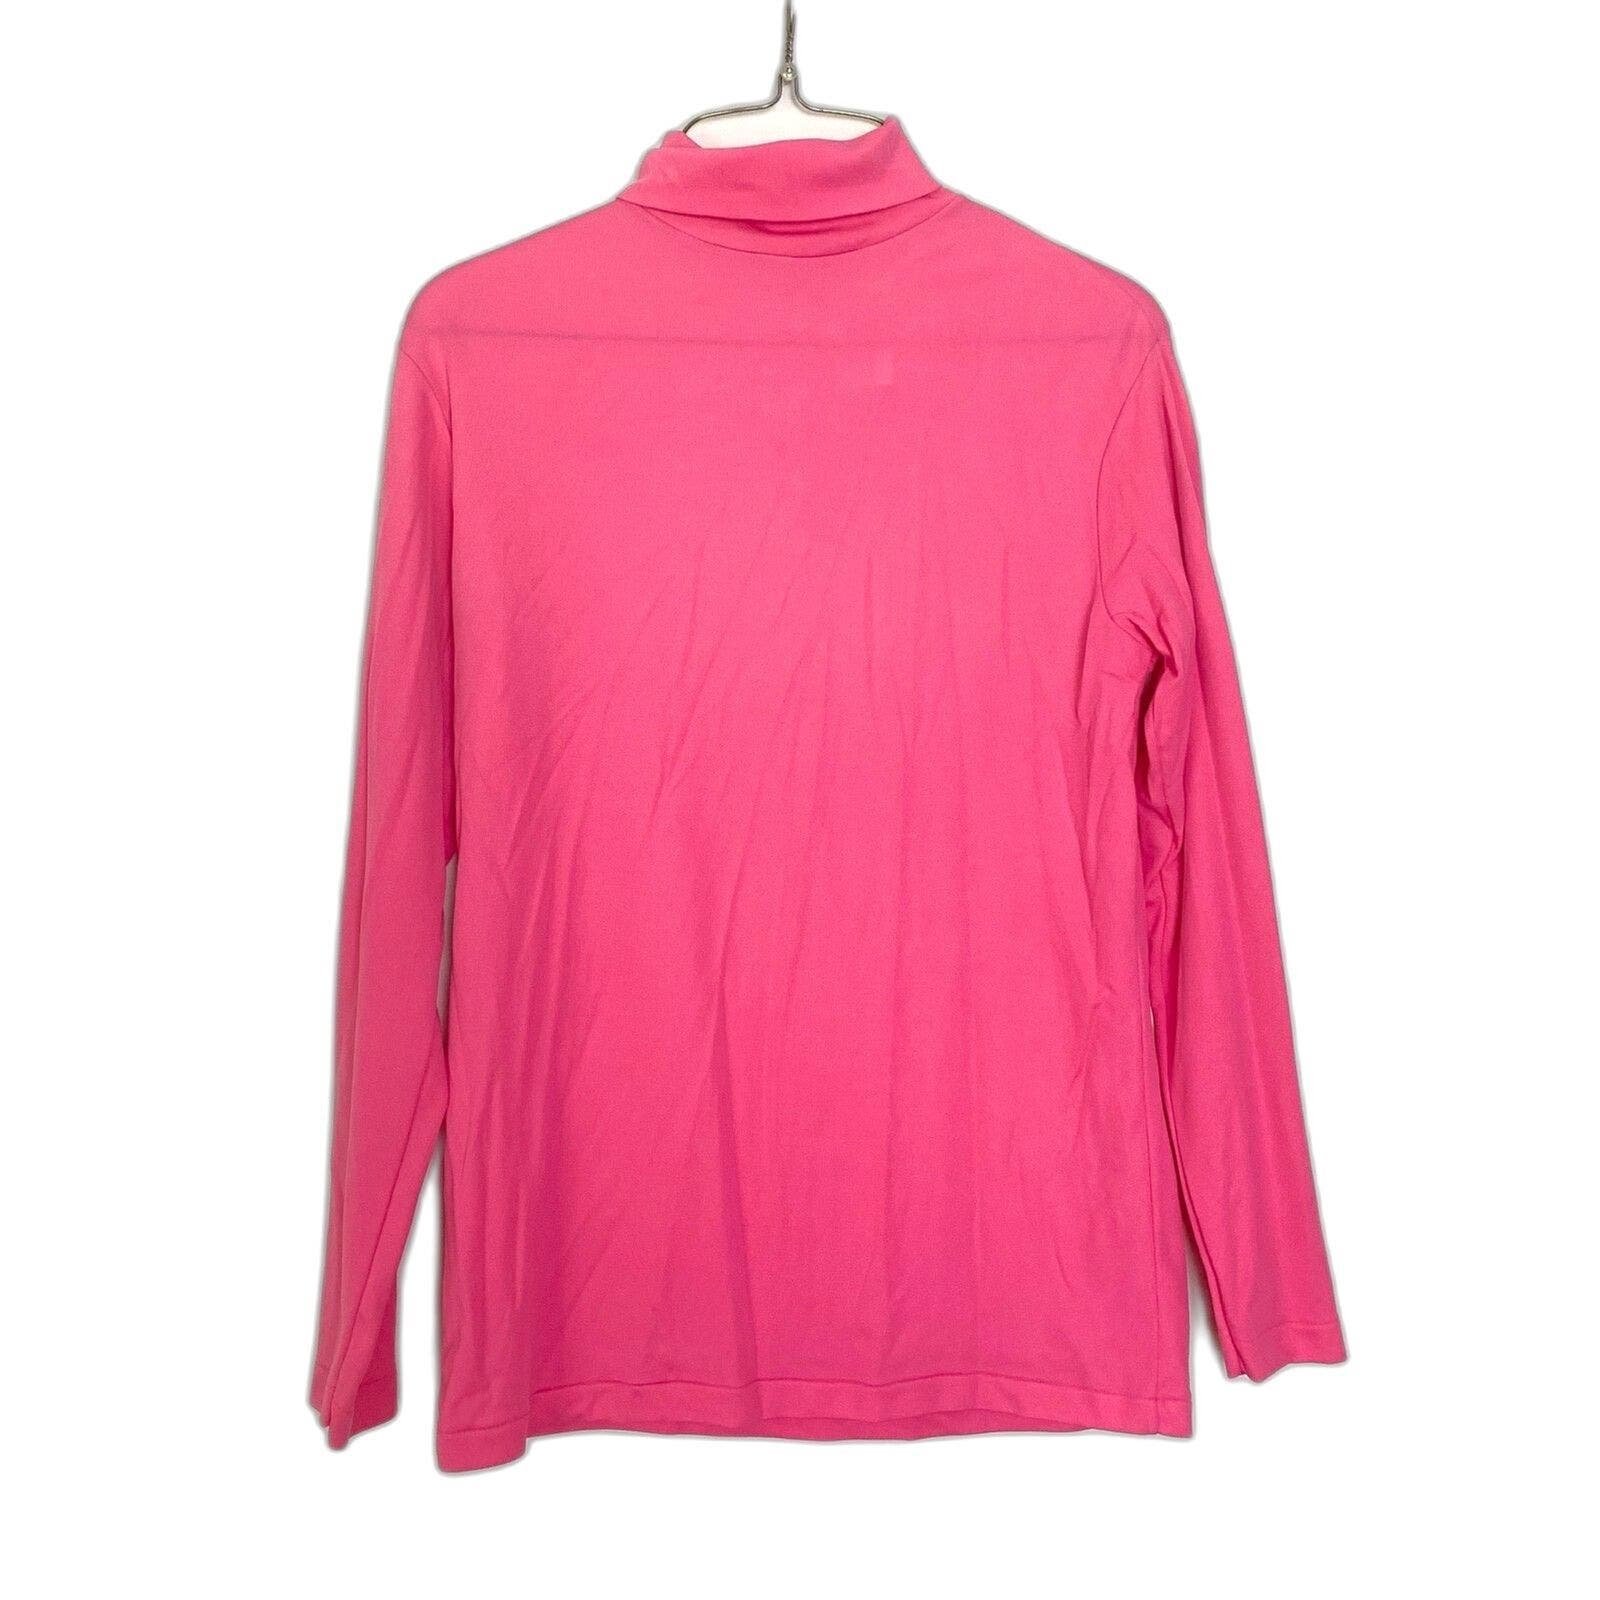 Affordable VINTAGE hot pink neon fitted long sleeve lay